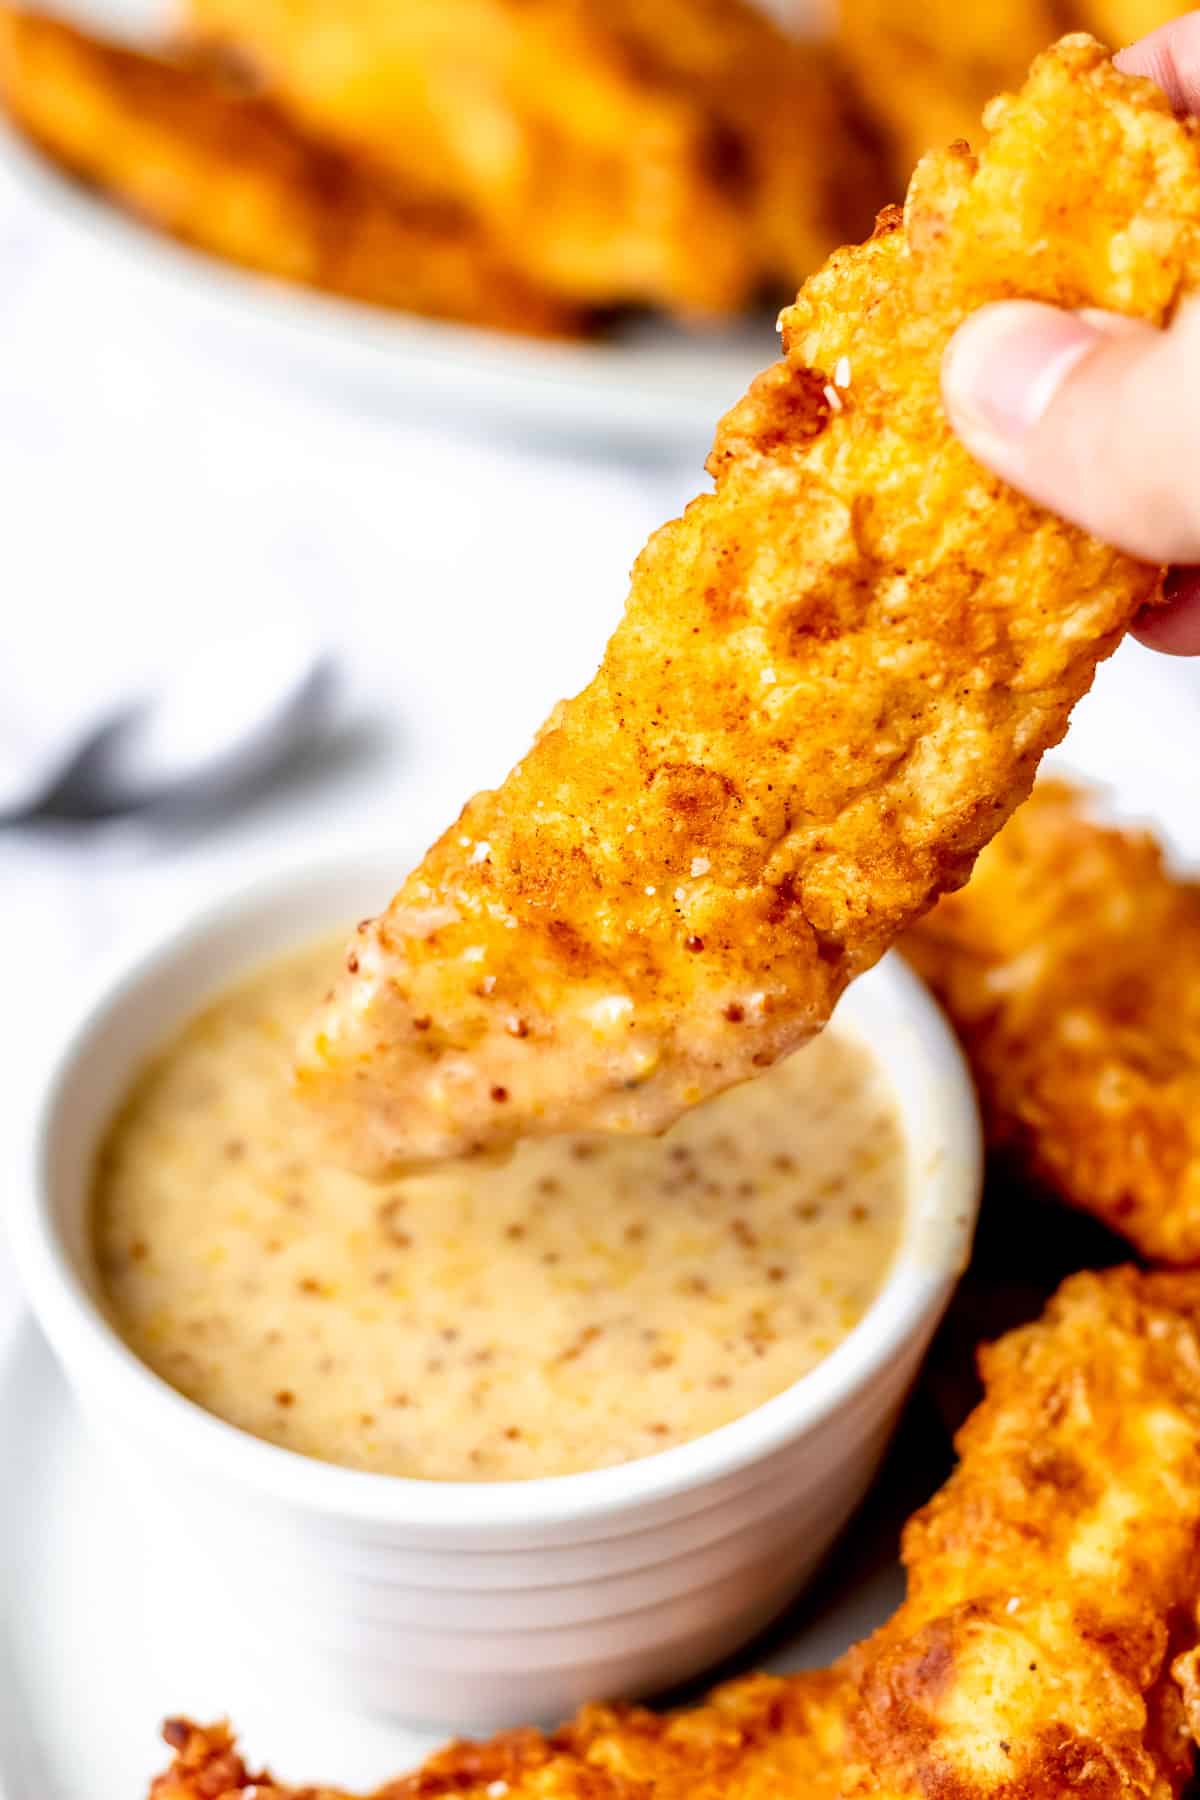 A fried chicken strip being dipped into a bowl of honey mustard.